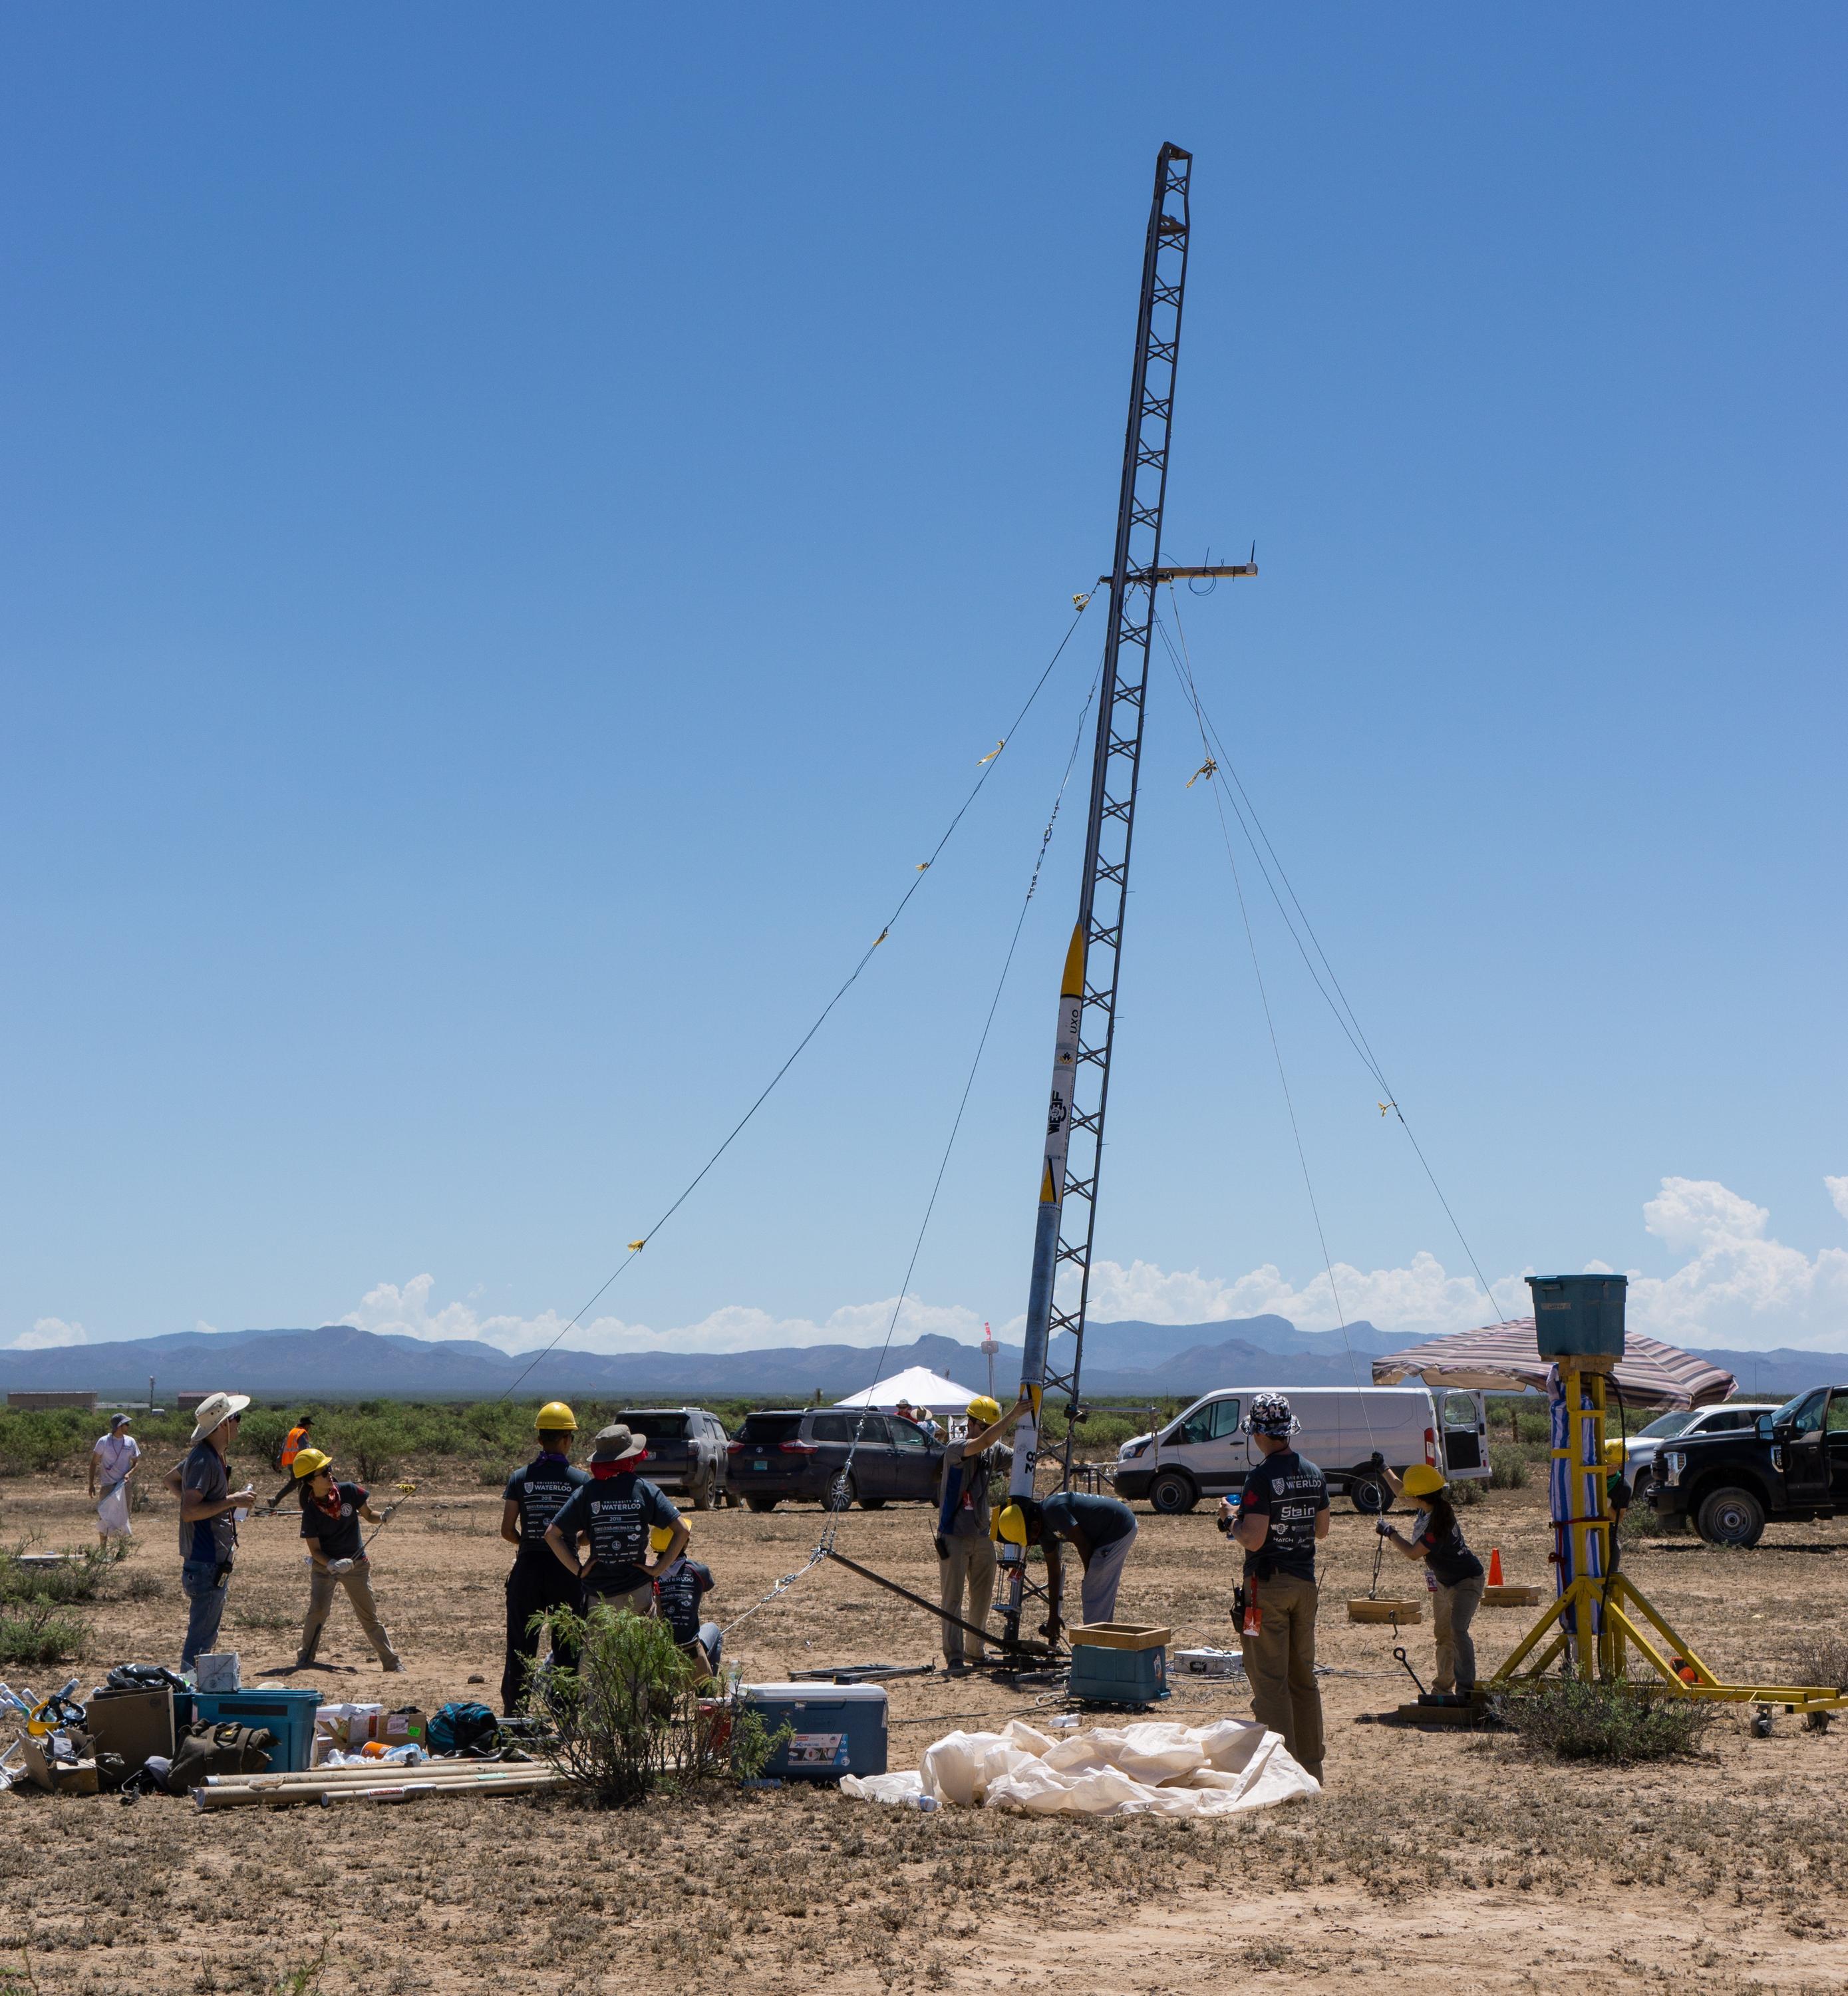 Members of a Waterloo Engineering student design team prepare to launch their new rocket, Unexploded Ordinance (UXO), during a recent competition in New Mexico, where they finished first in their category.